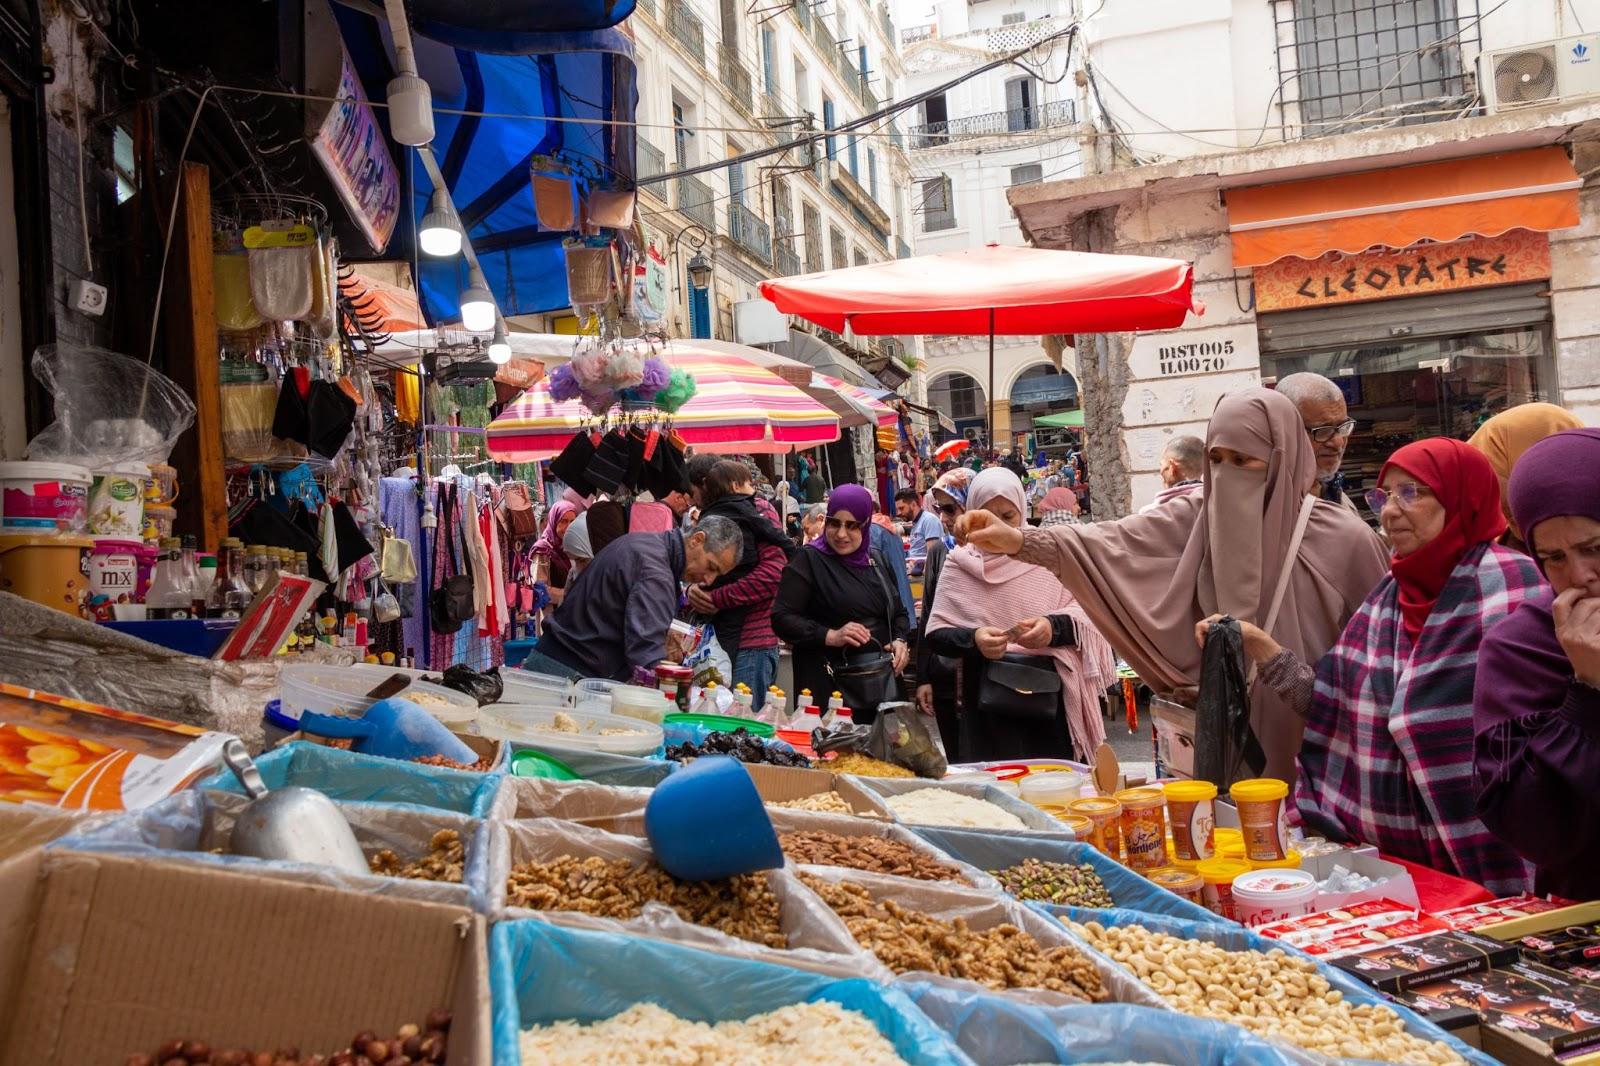 crowded street market in the Bab el Oued district of Alger, Algiers,